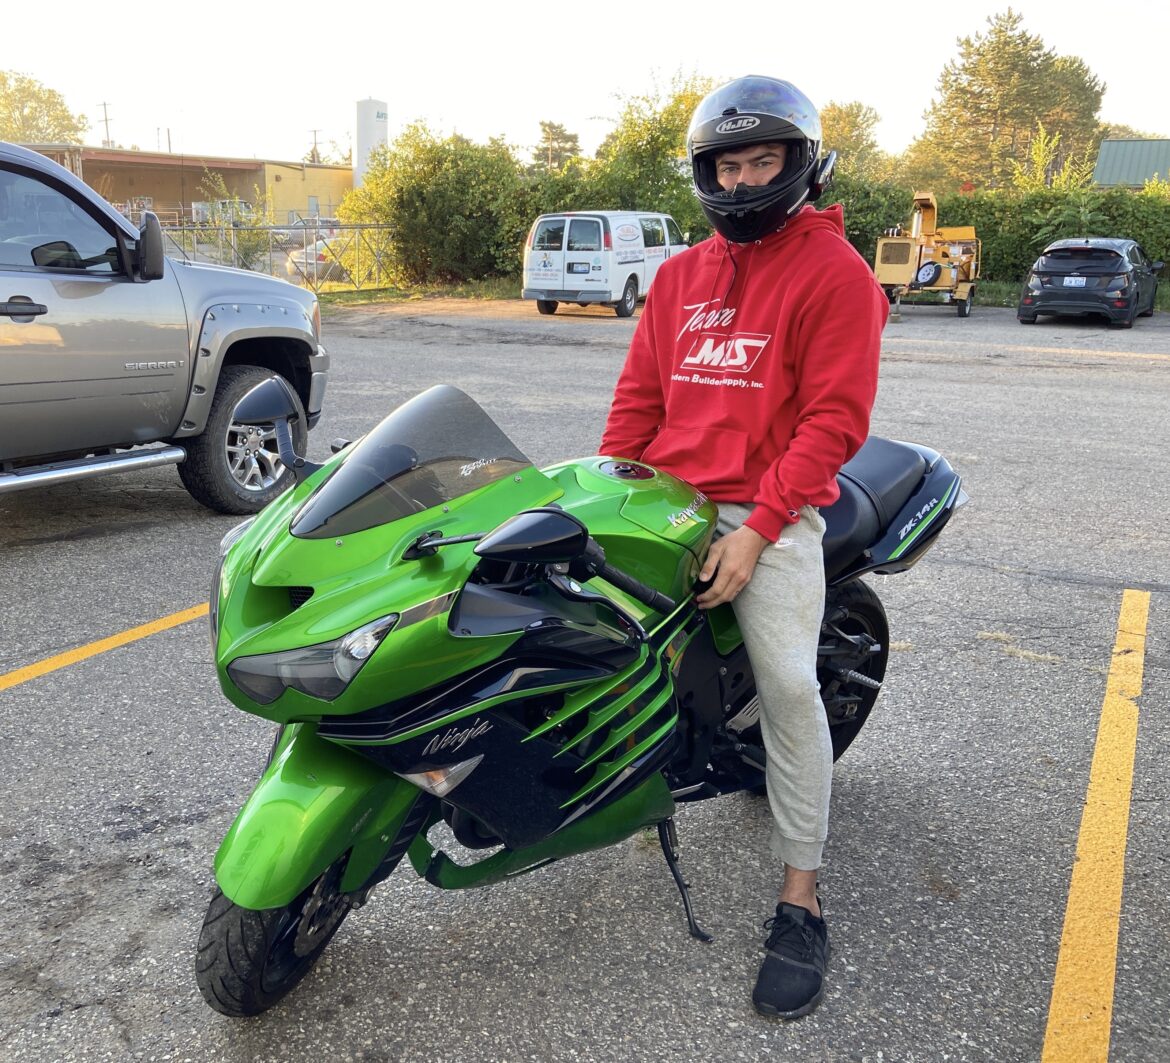 Lansing biker Dain Danos has been riding bikes for over 15 years. He said two friends have died in biking accidents over the past year.